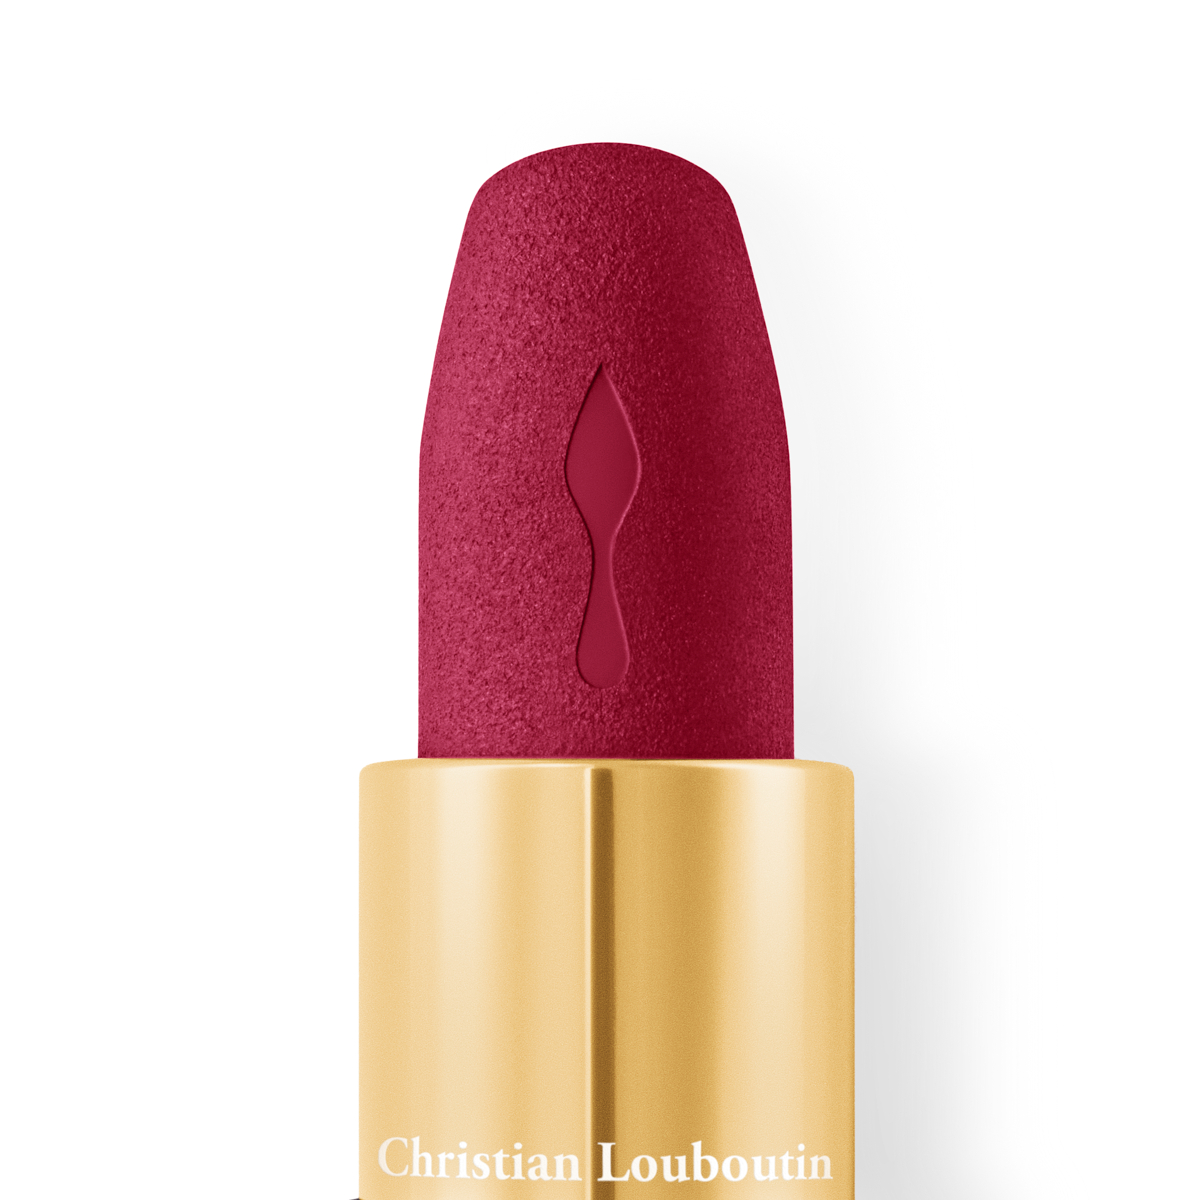 Lipstick Art: Christian Louboutin's New $90 Lip Colour Proves He's Serious  About Cosmetics